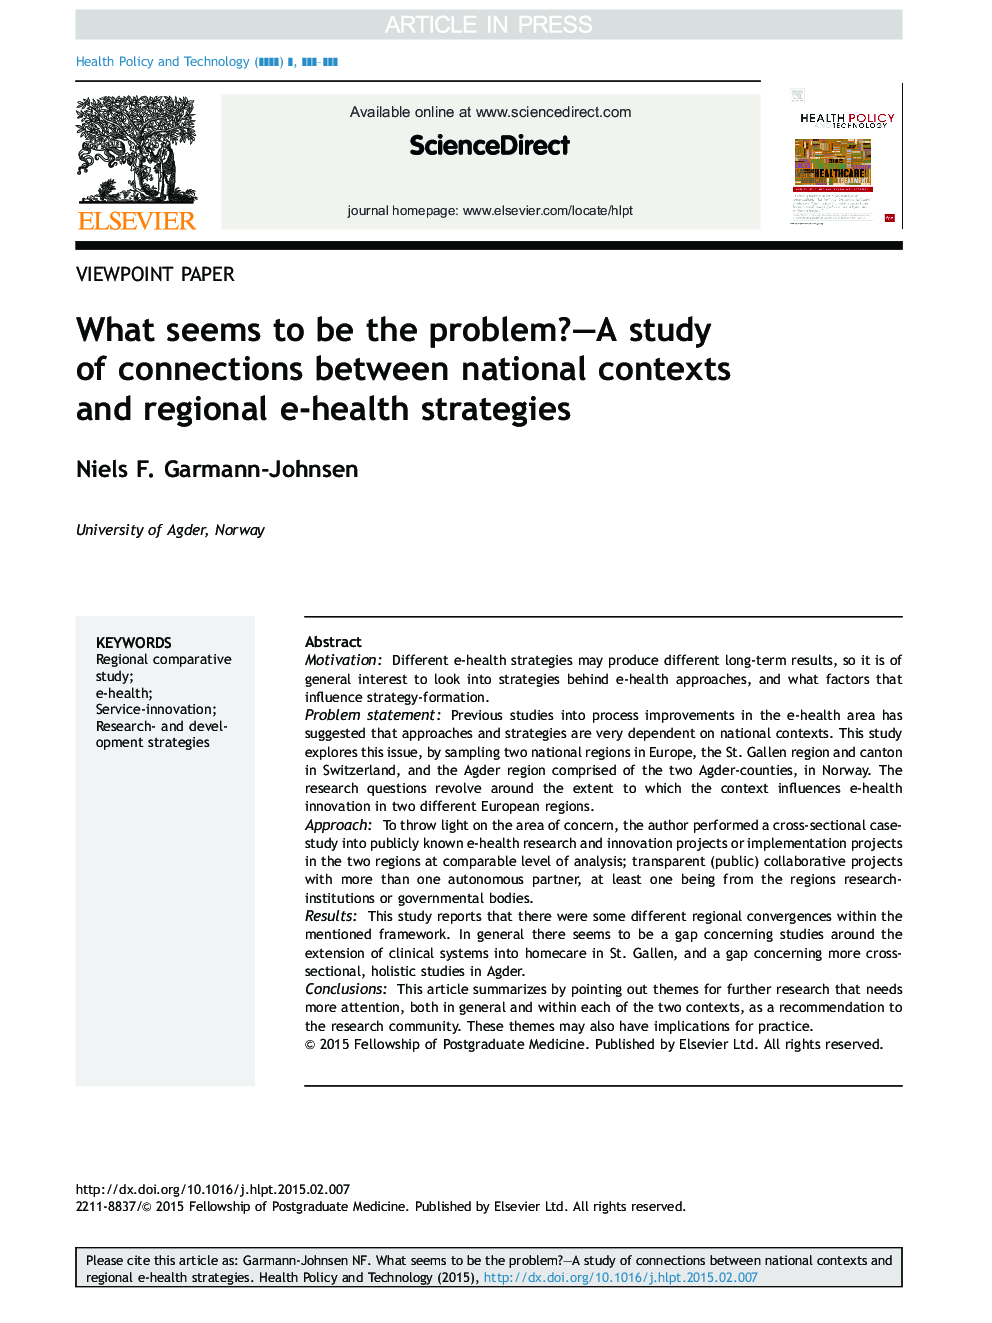 What seems to be the problem?-A study of connections between national contexts and regional e-health strategies